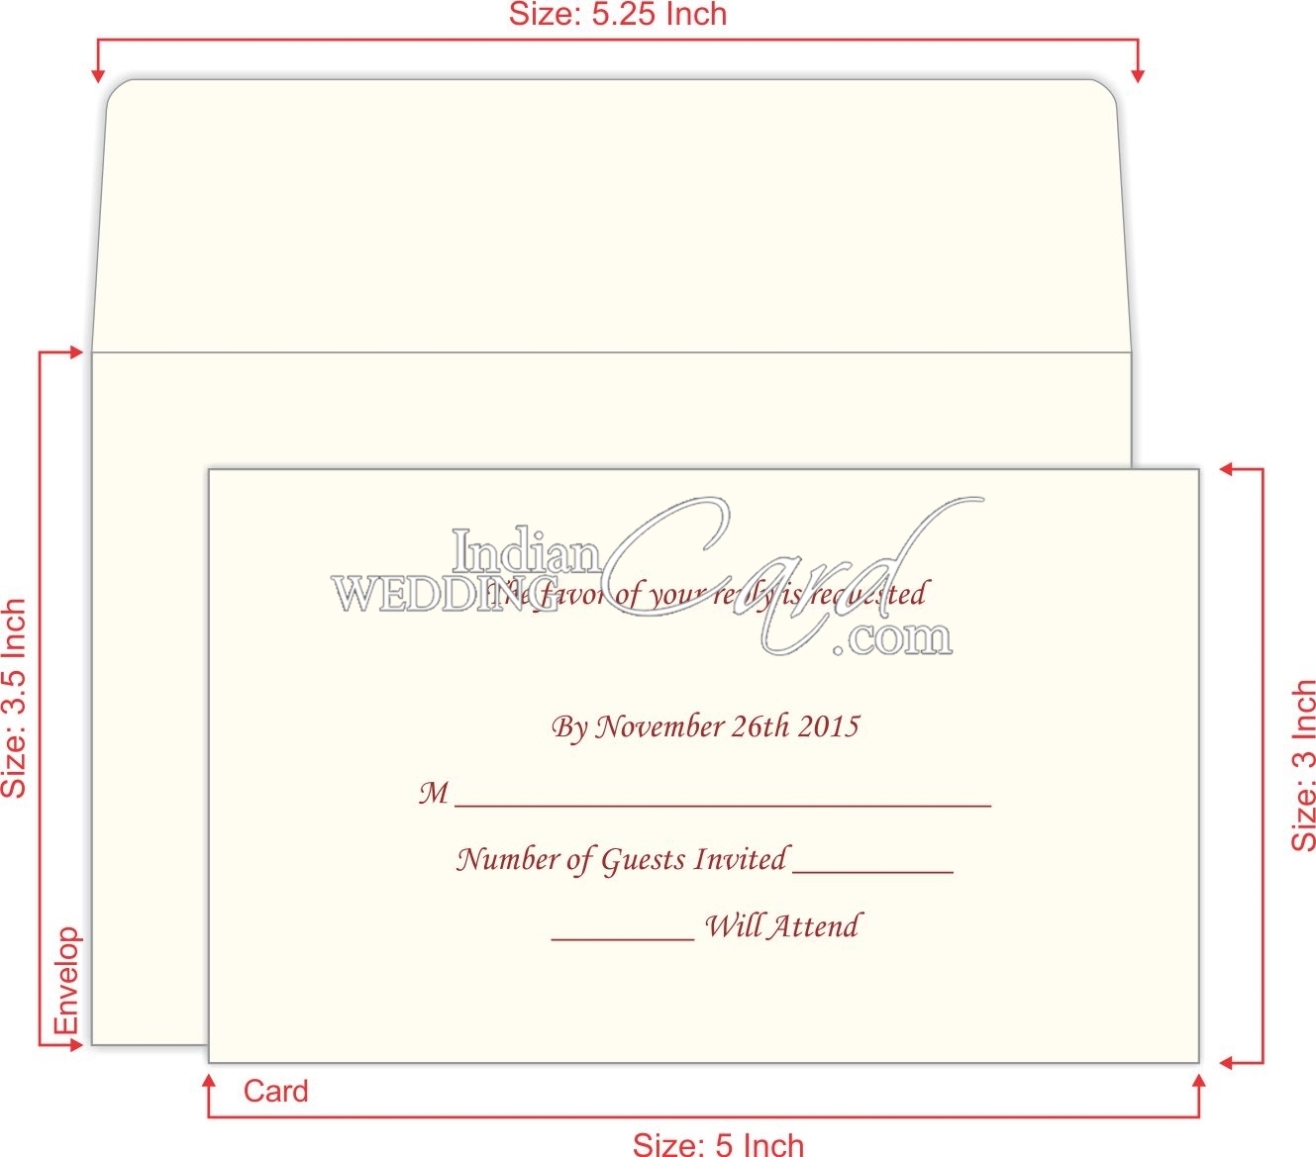 Rsvp Invitations Cards, Indian Wedding Card Rsvp1 With Wedding Card Size Template